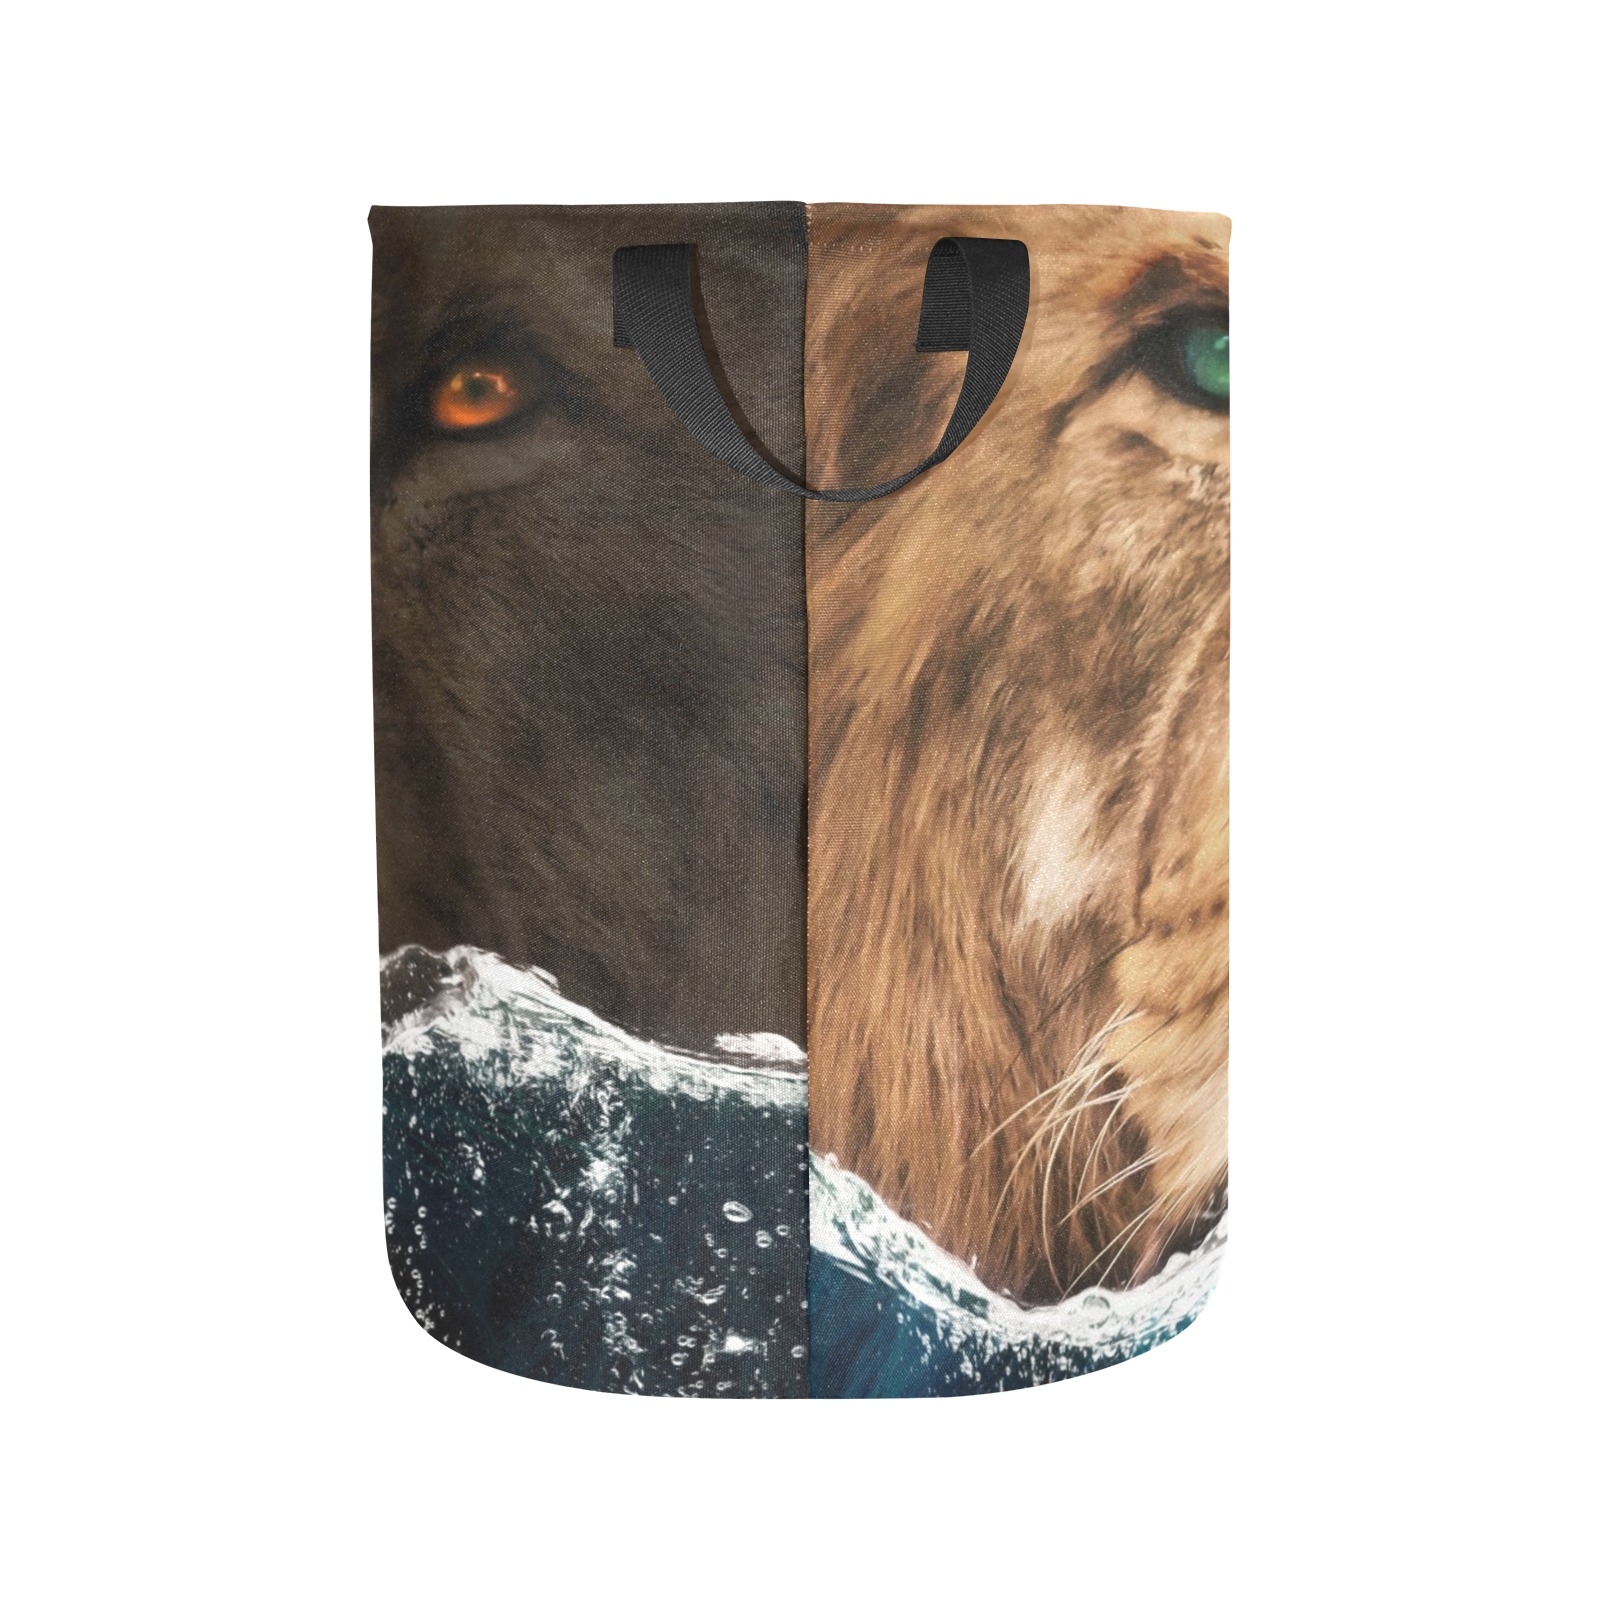 Lion behind the Ocean Laundry Bag (Large)